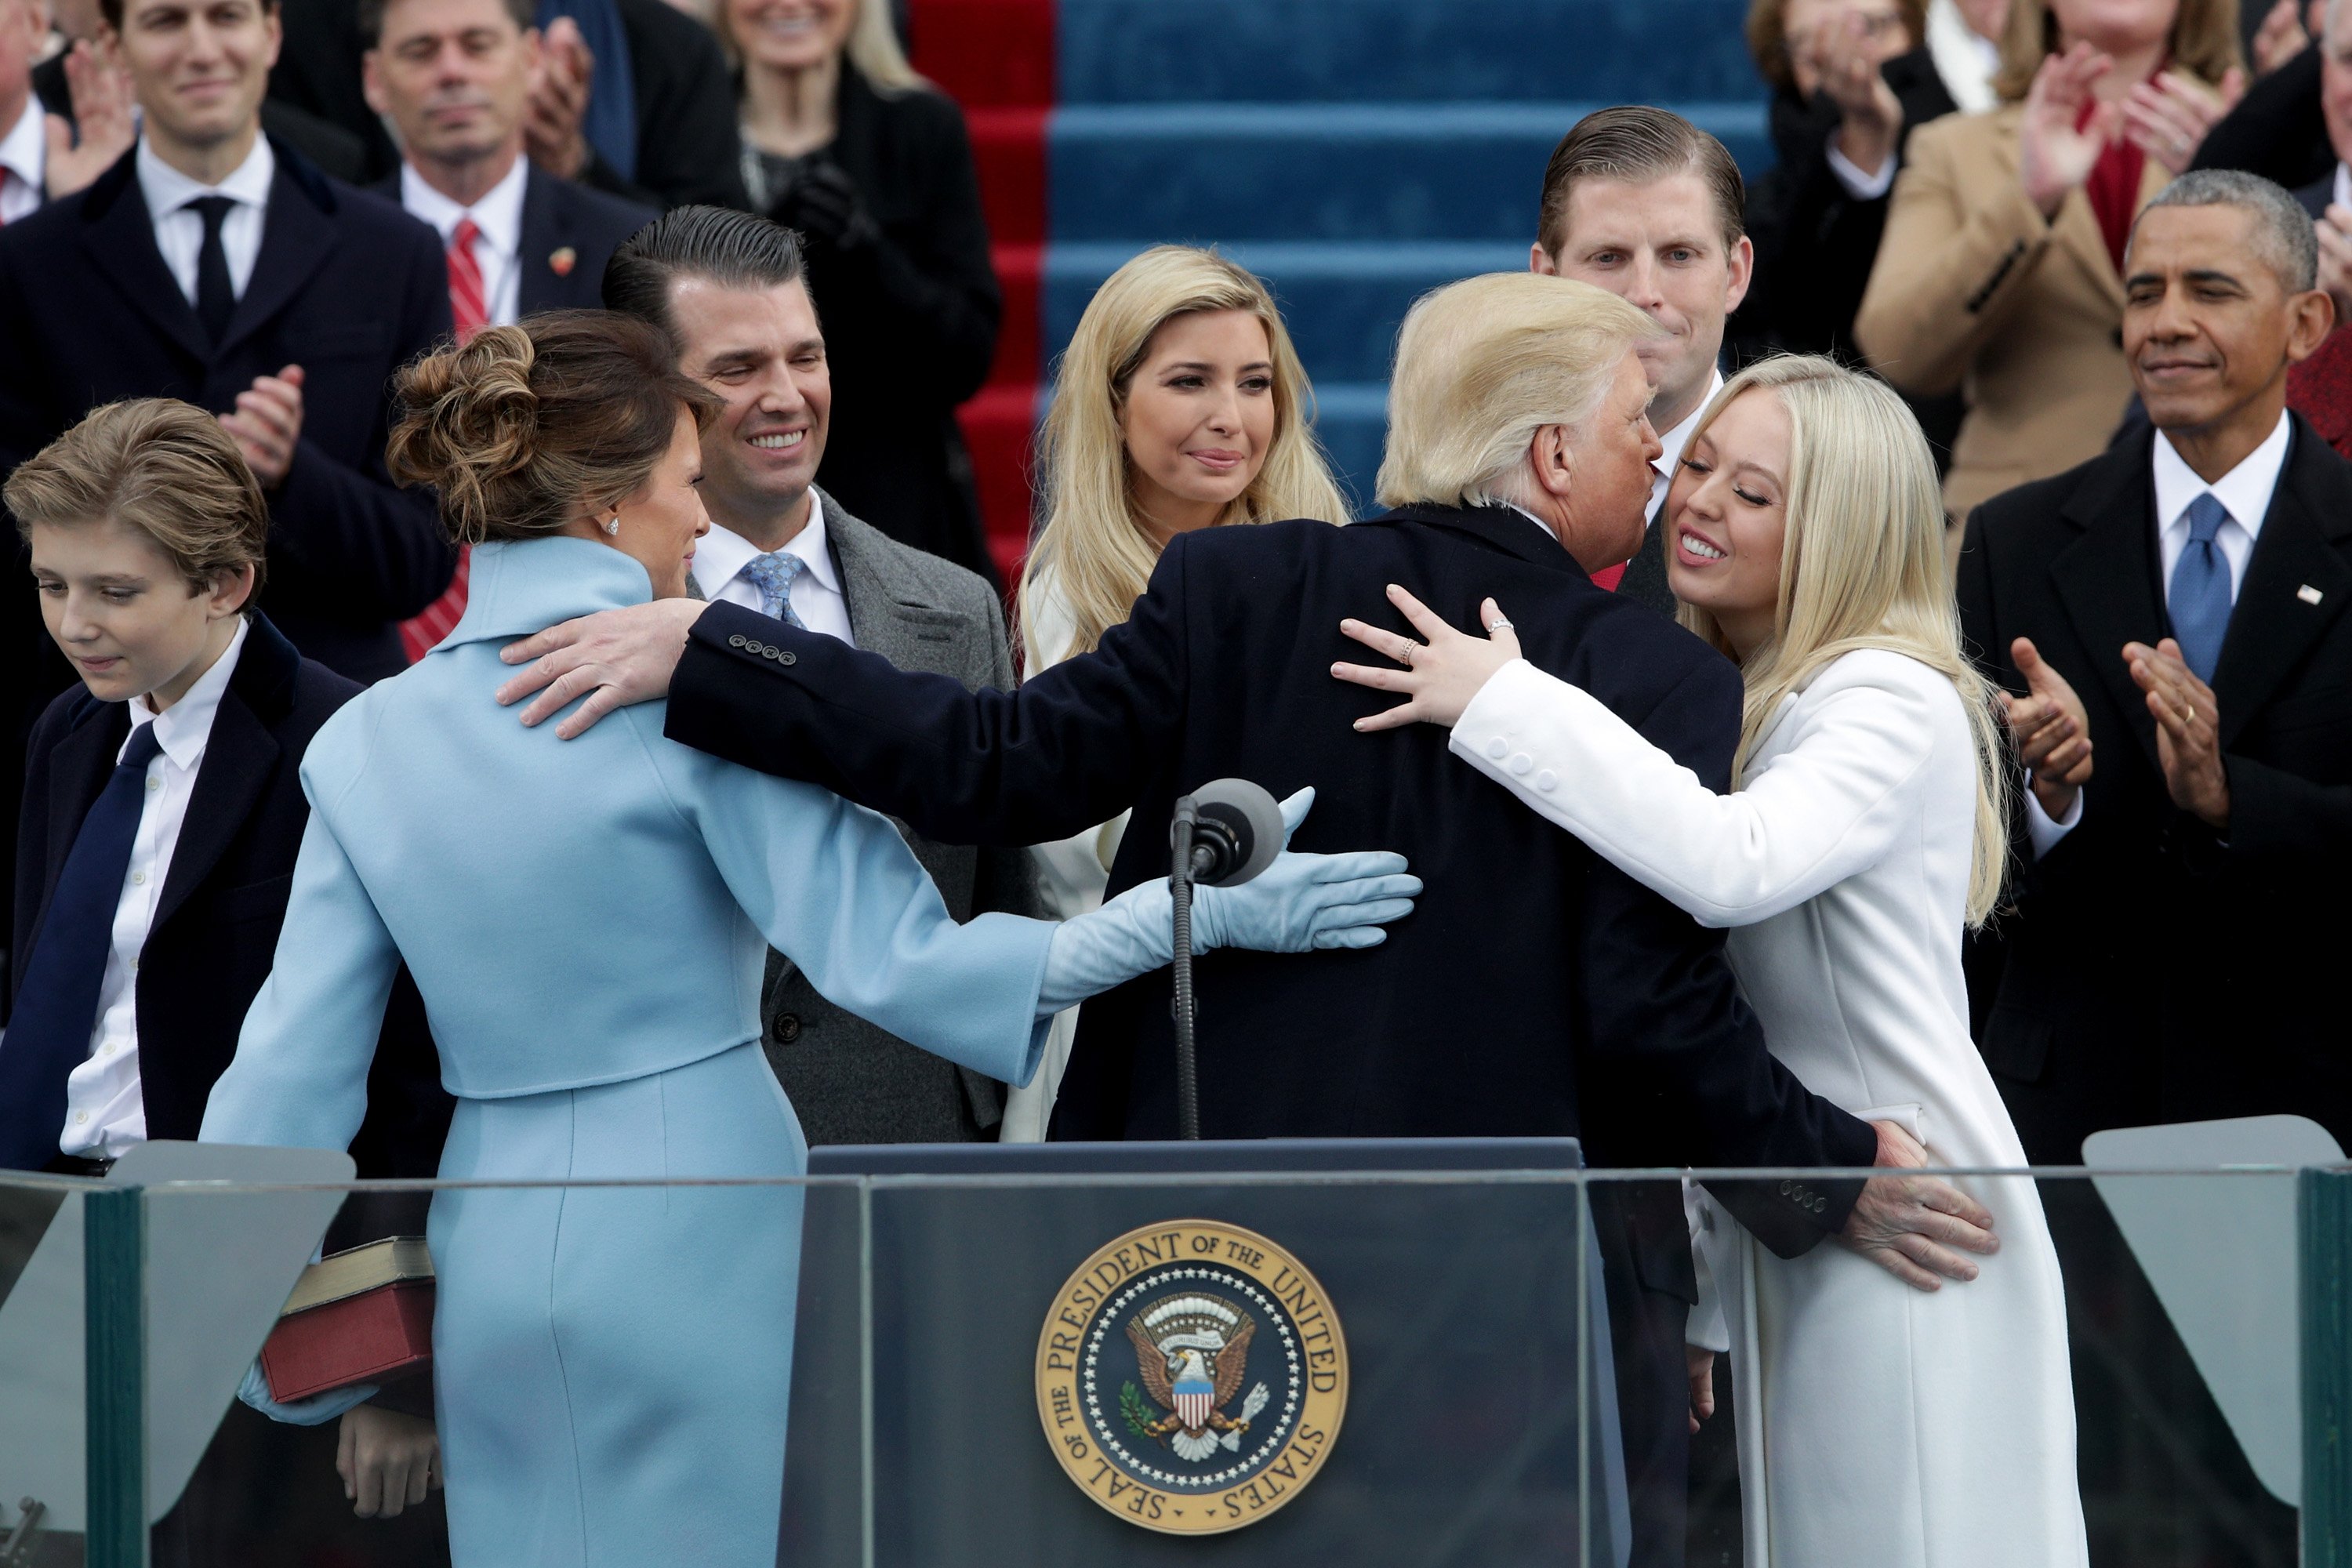 President Donald Trump kisses his daughter Tiffany Trump after his inauguration on the West Front of the U.S. Capitol on January 20, 2017 | Photo: GettyImages